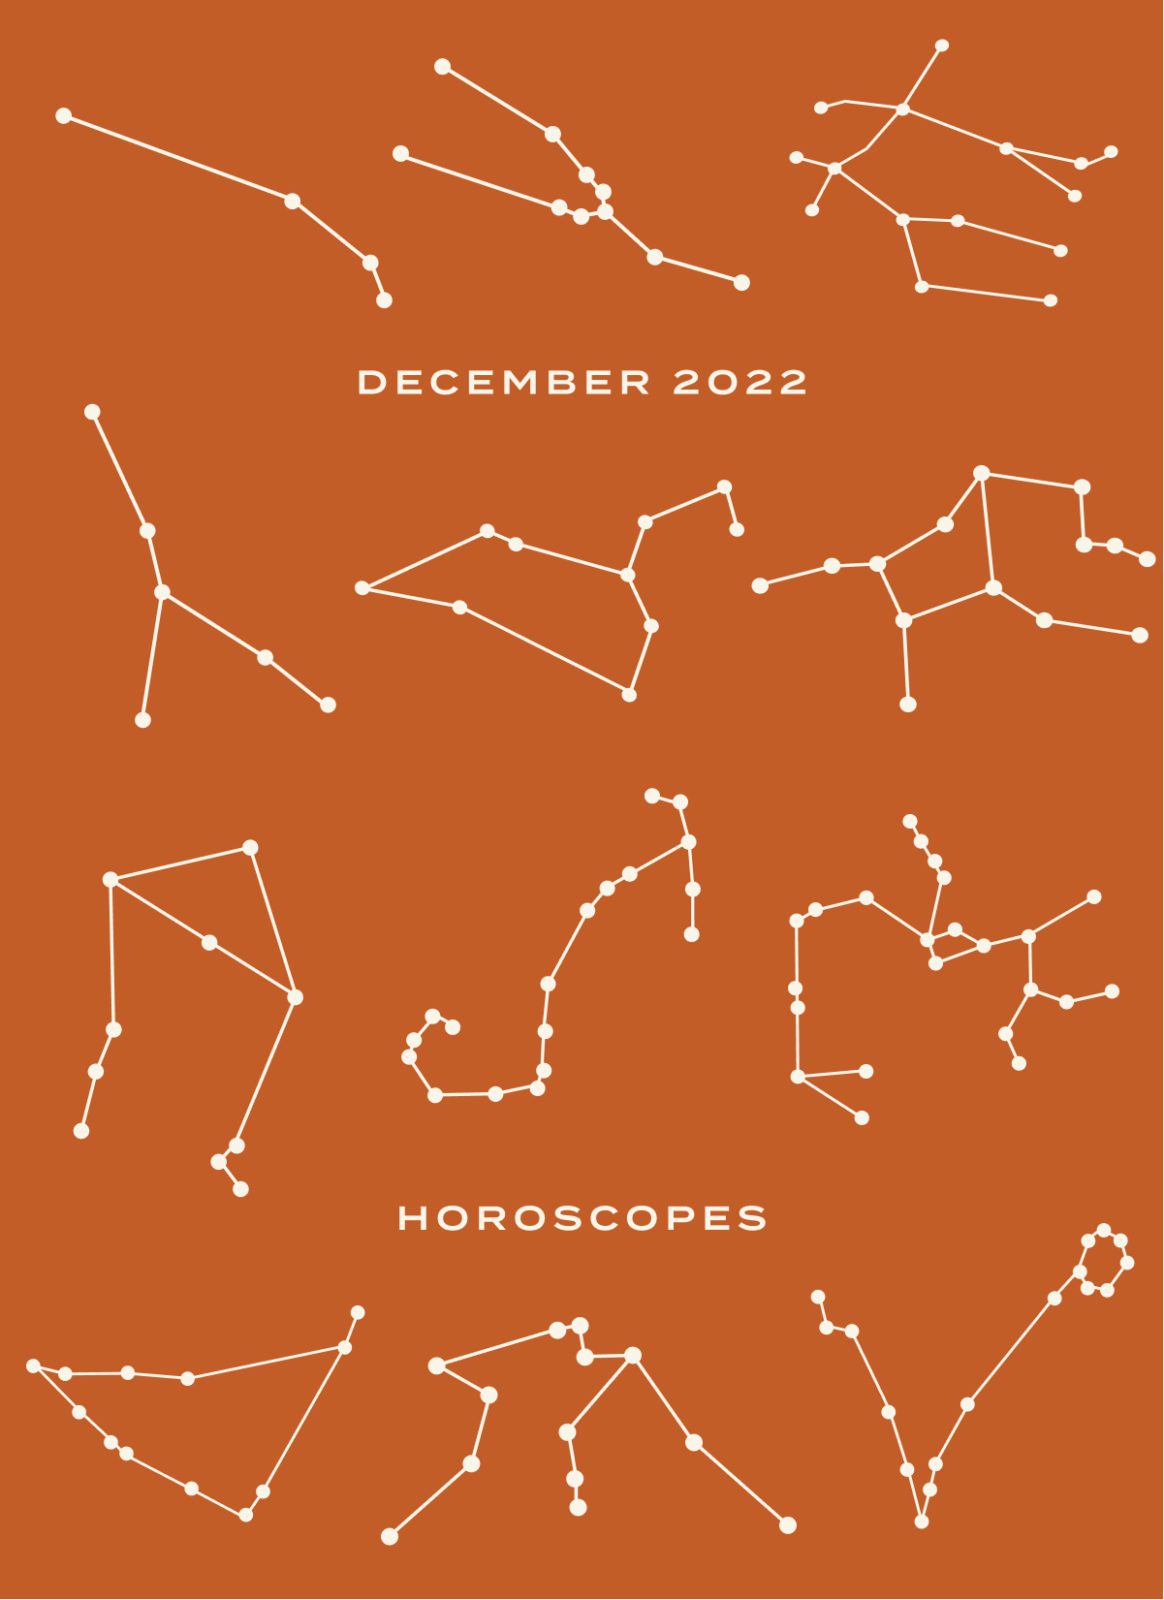 Your December Monthly Horoscope | Wit & Delight